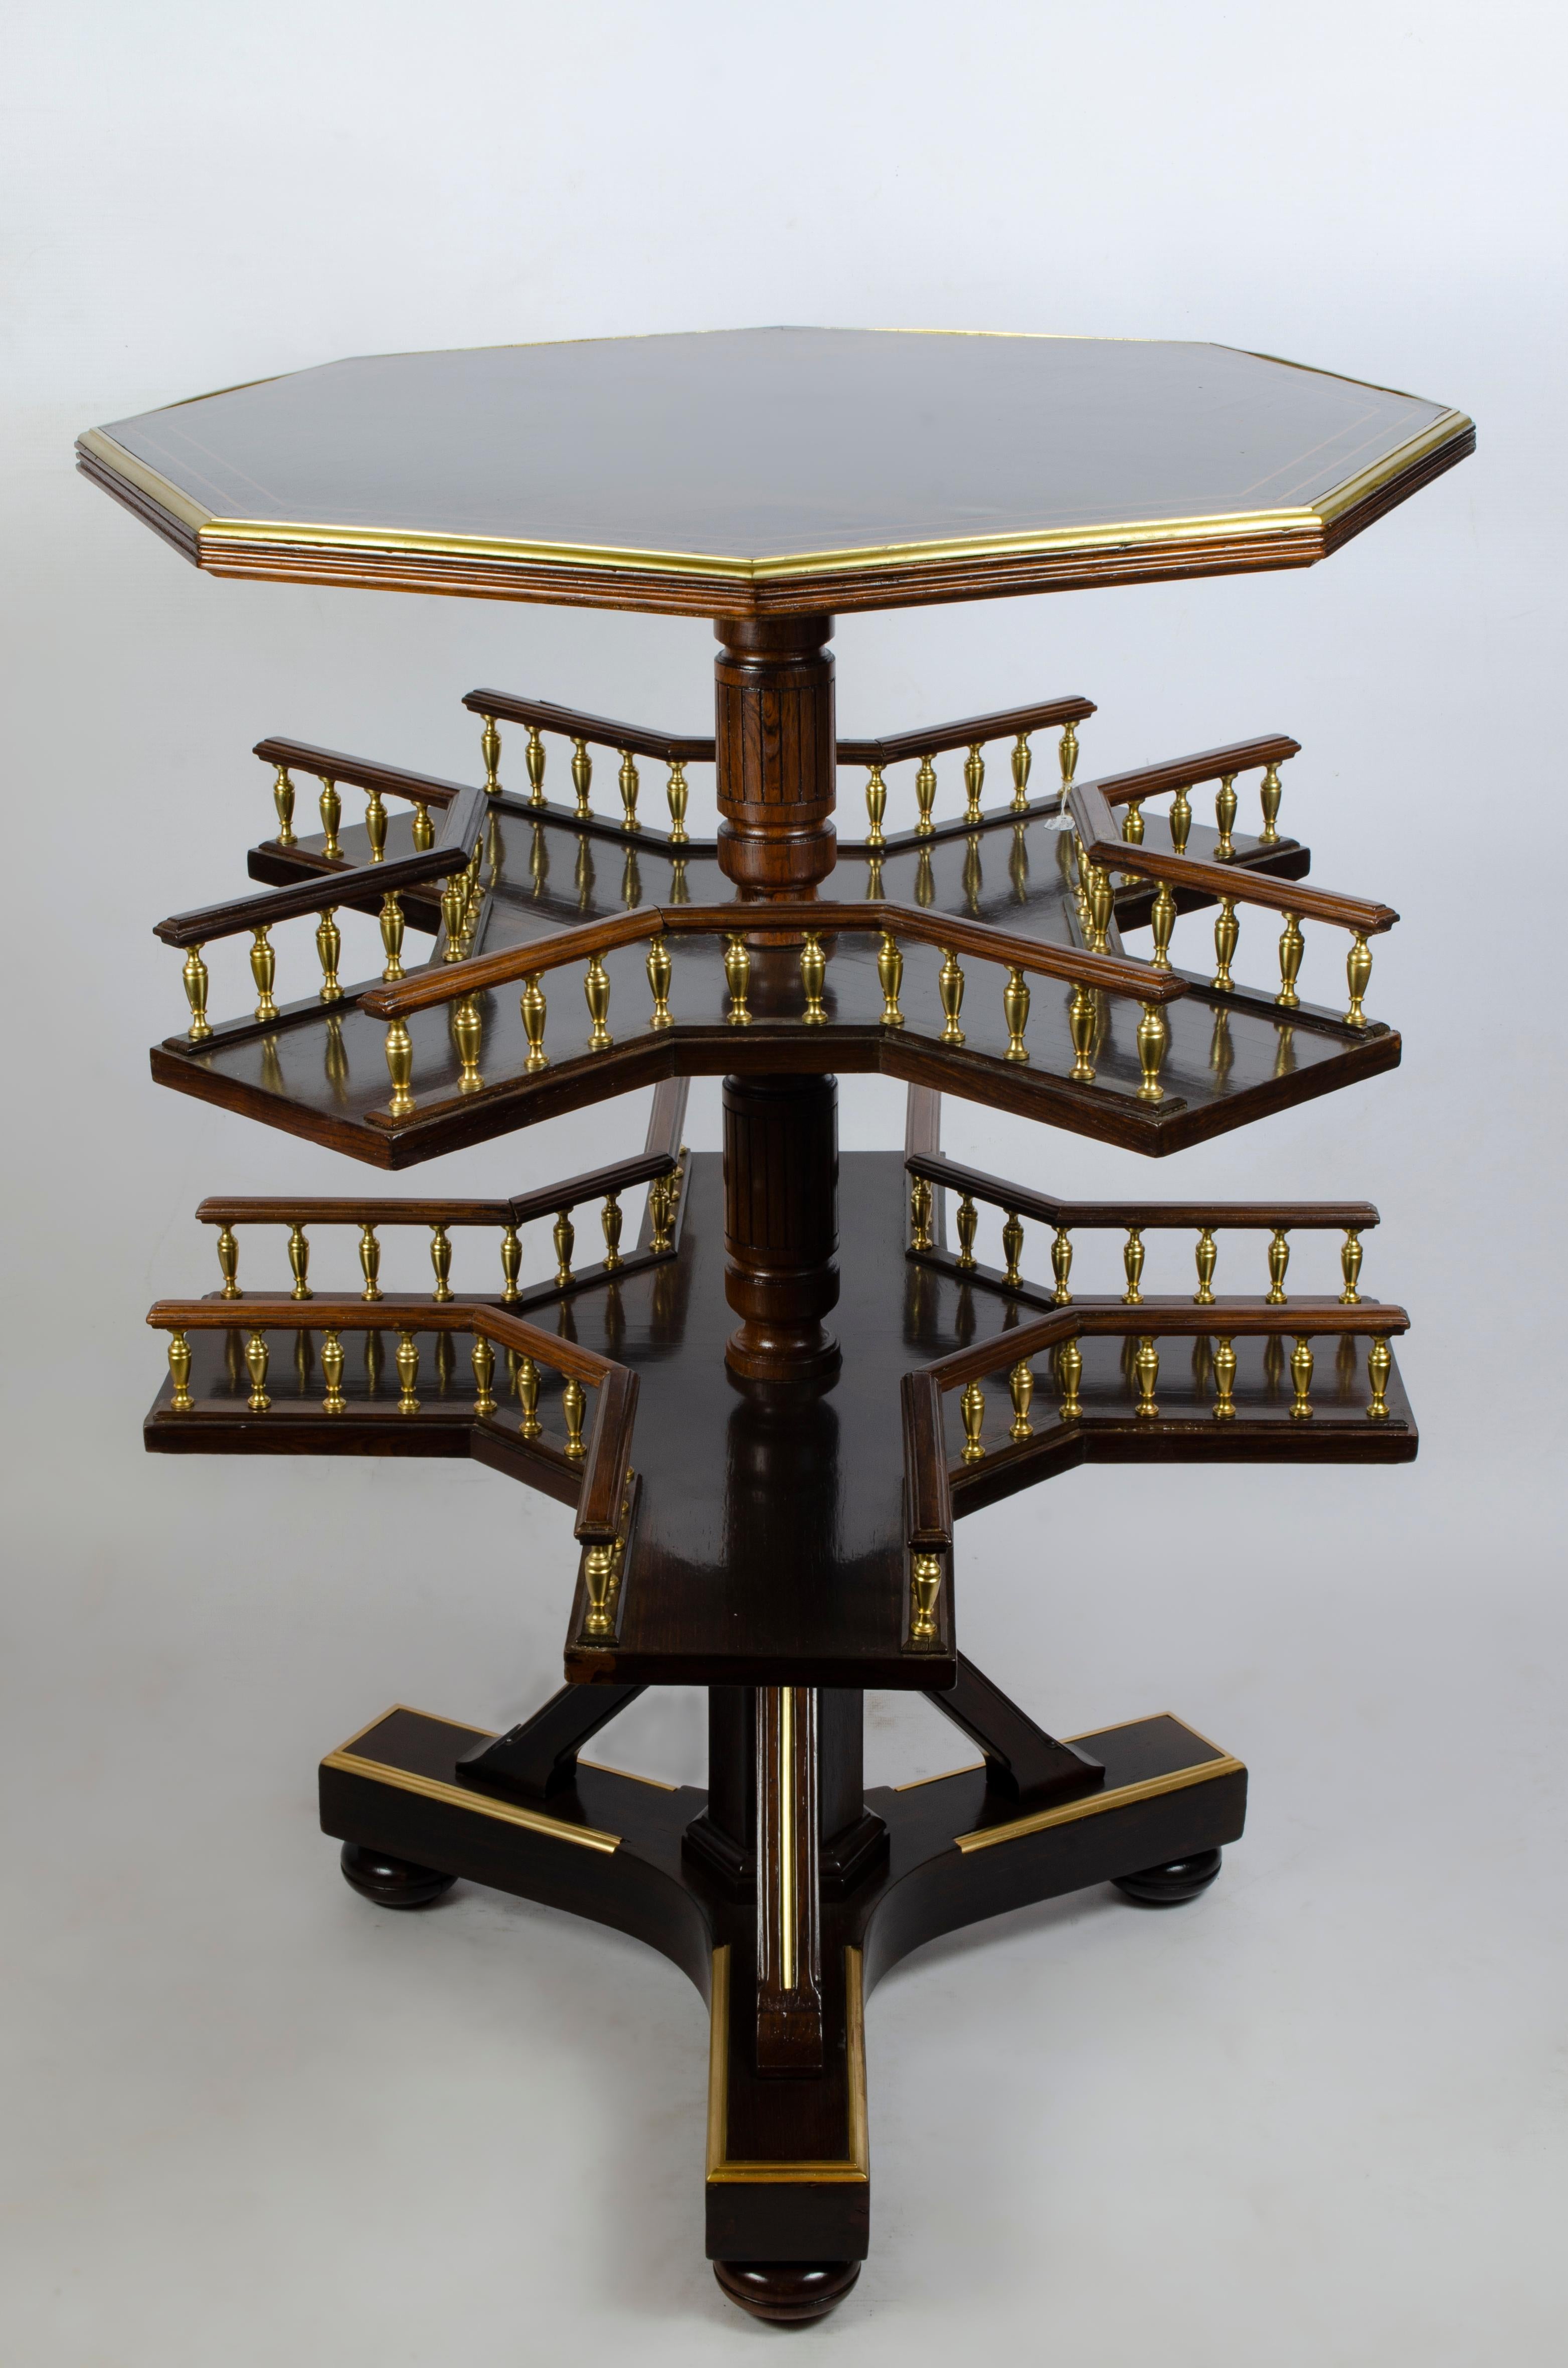 Peculiar French book table, by Paul Sormani (1817-1877). Signed Paul Somani, 10 Charlot, Paris.

Made of rosewood veneered wood. Octagonal shaped lid. Fruit wood fillets. Two revolving shelves with turned bar rails, with gilt